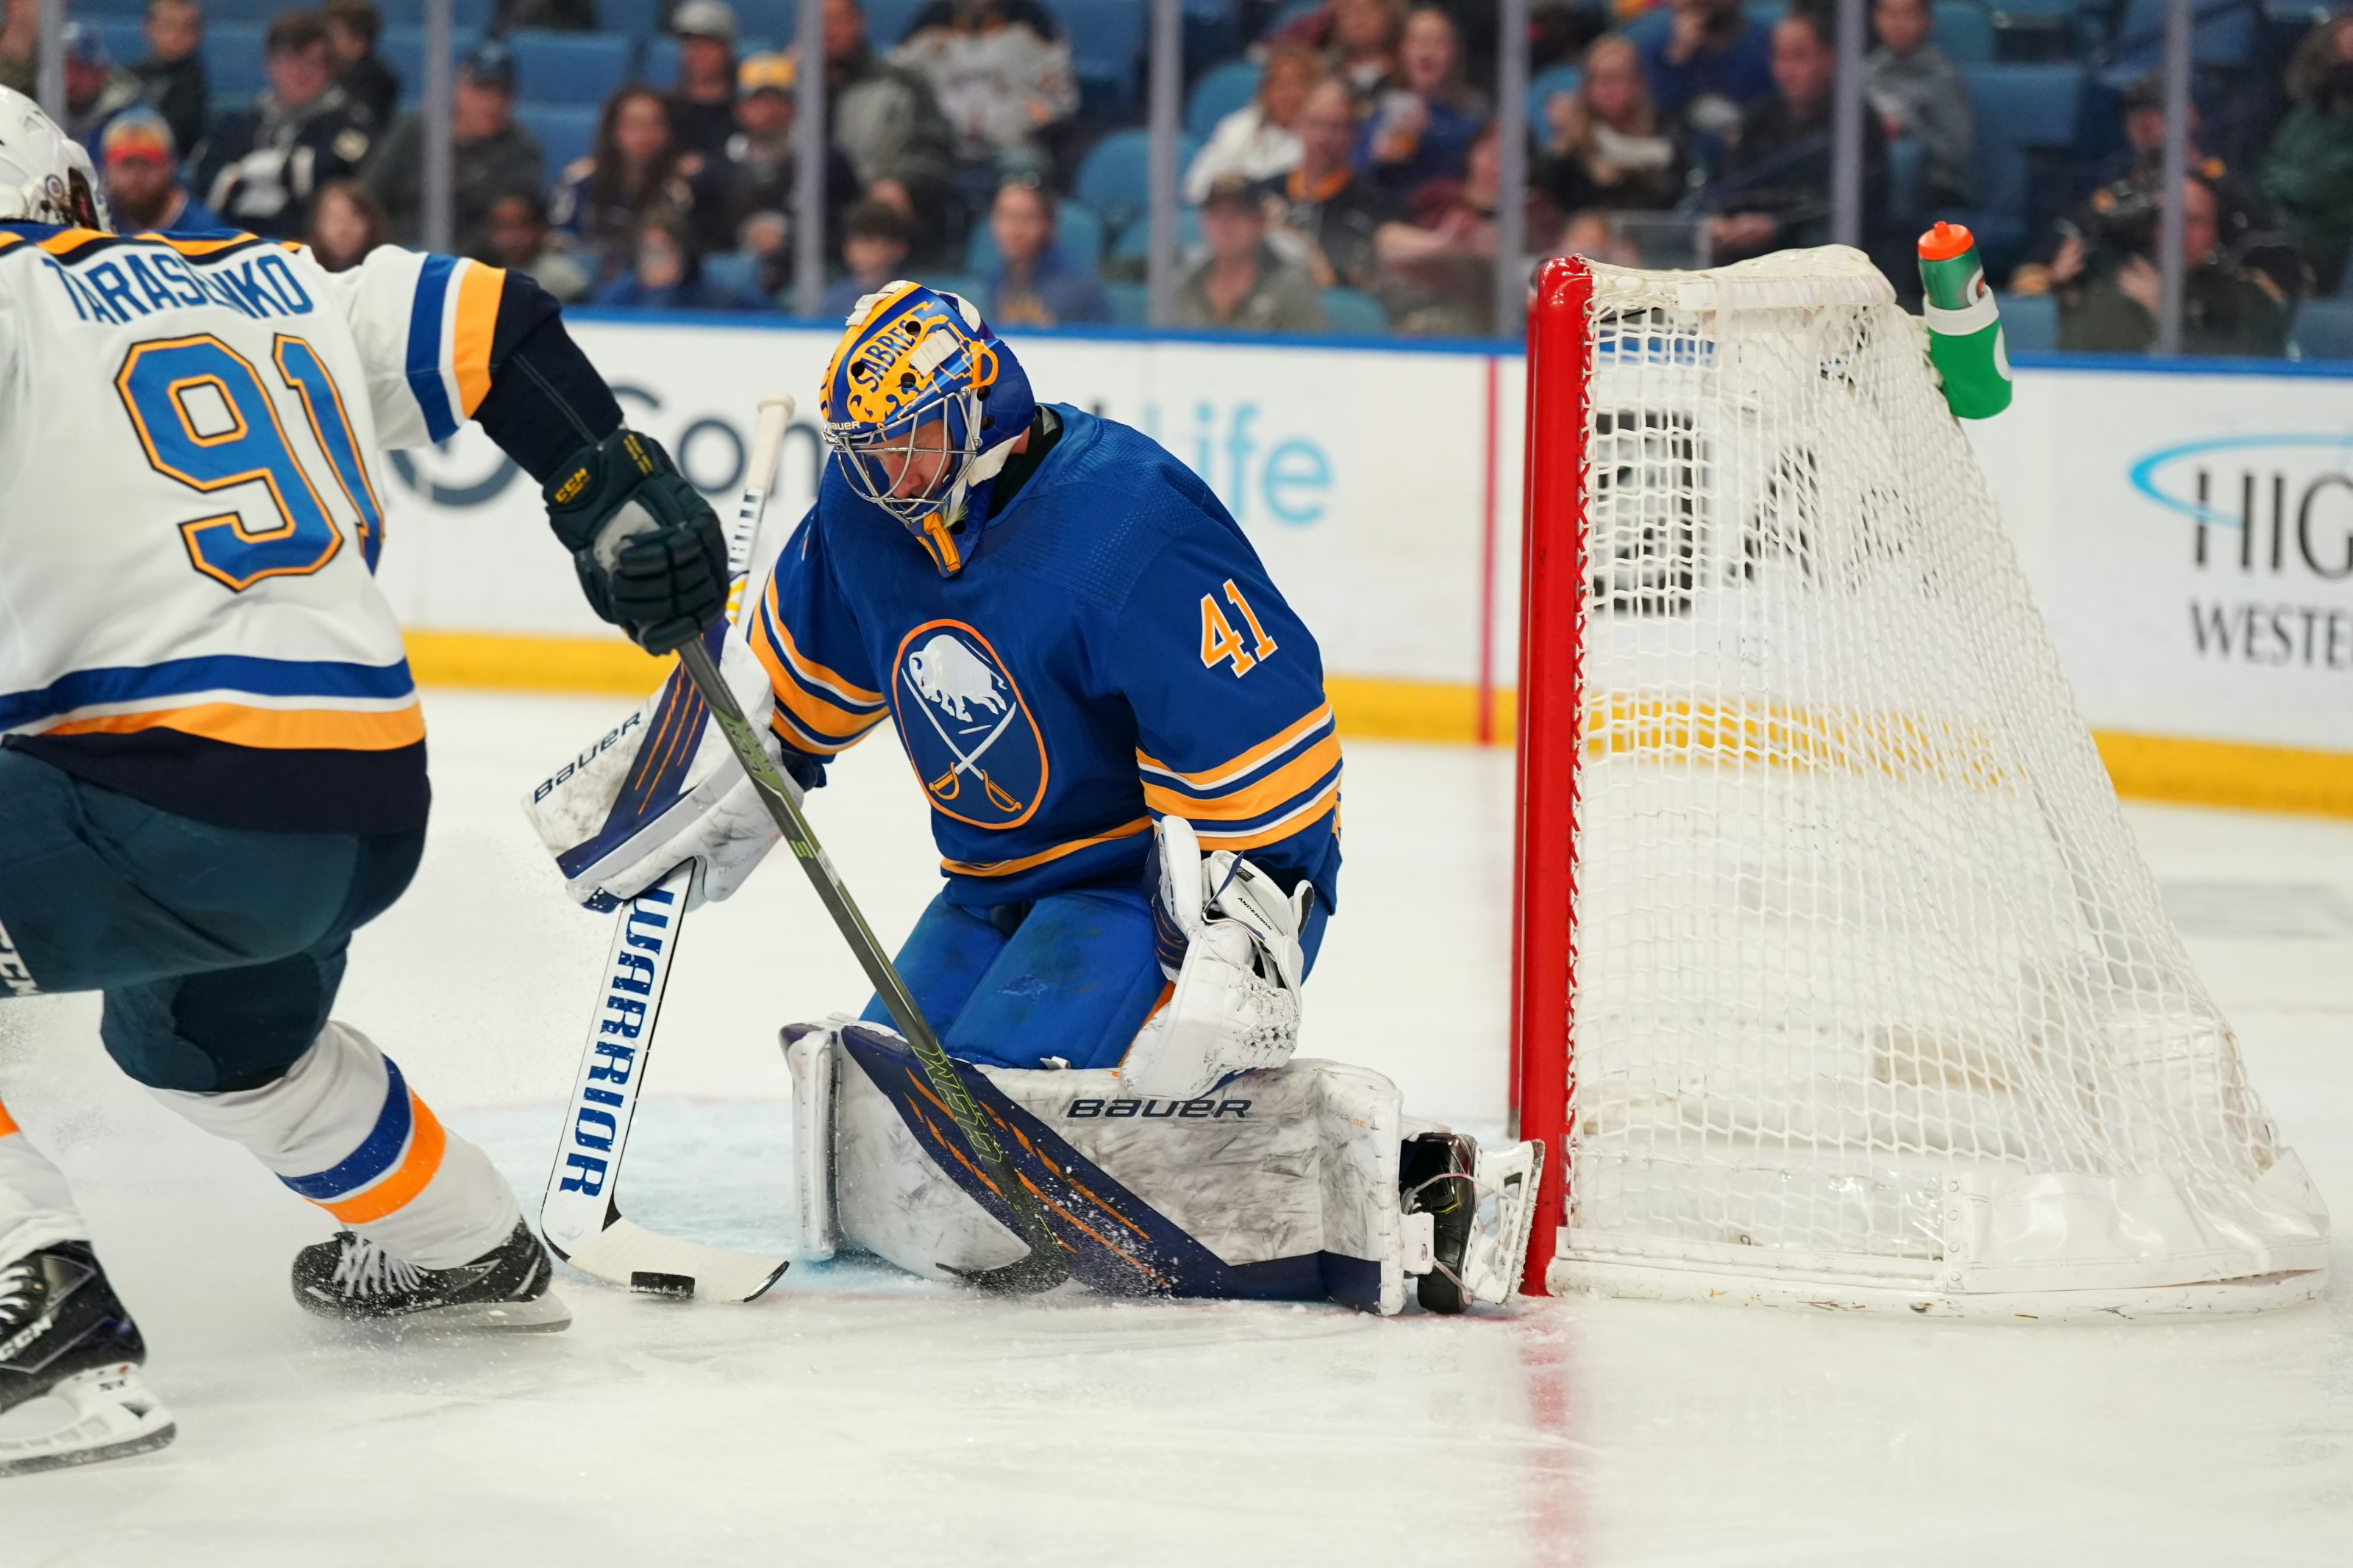 Sabres goalie prospects – Two in the Box